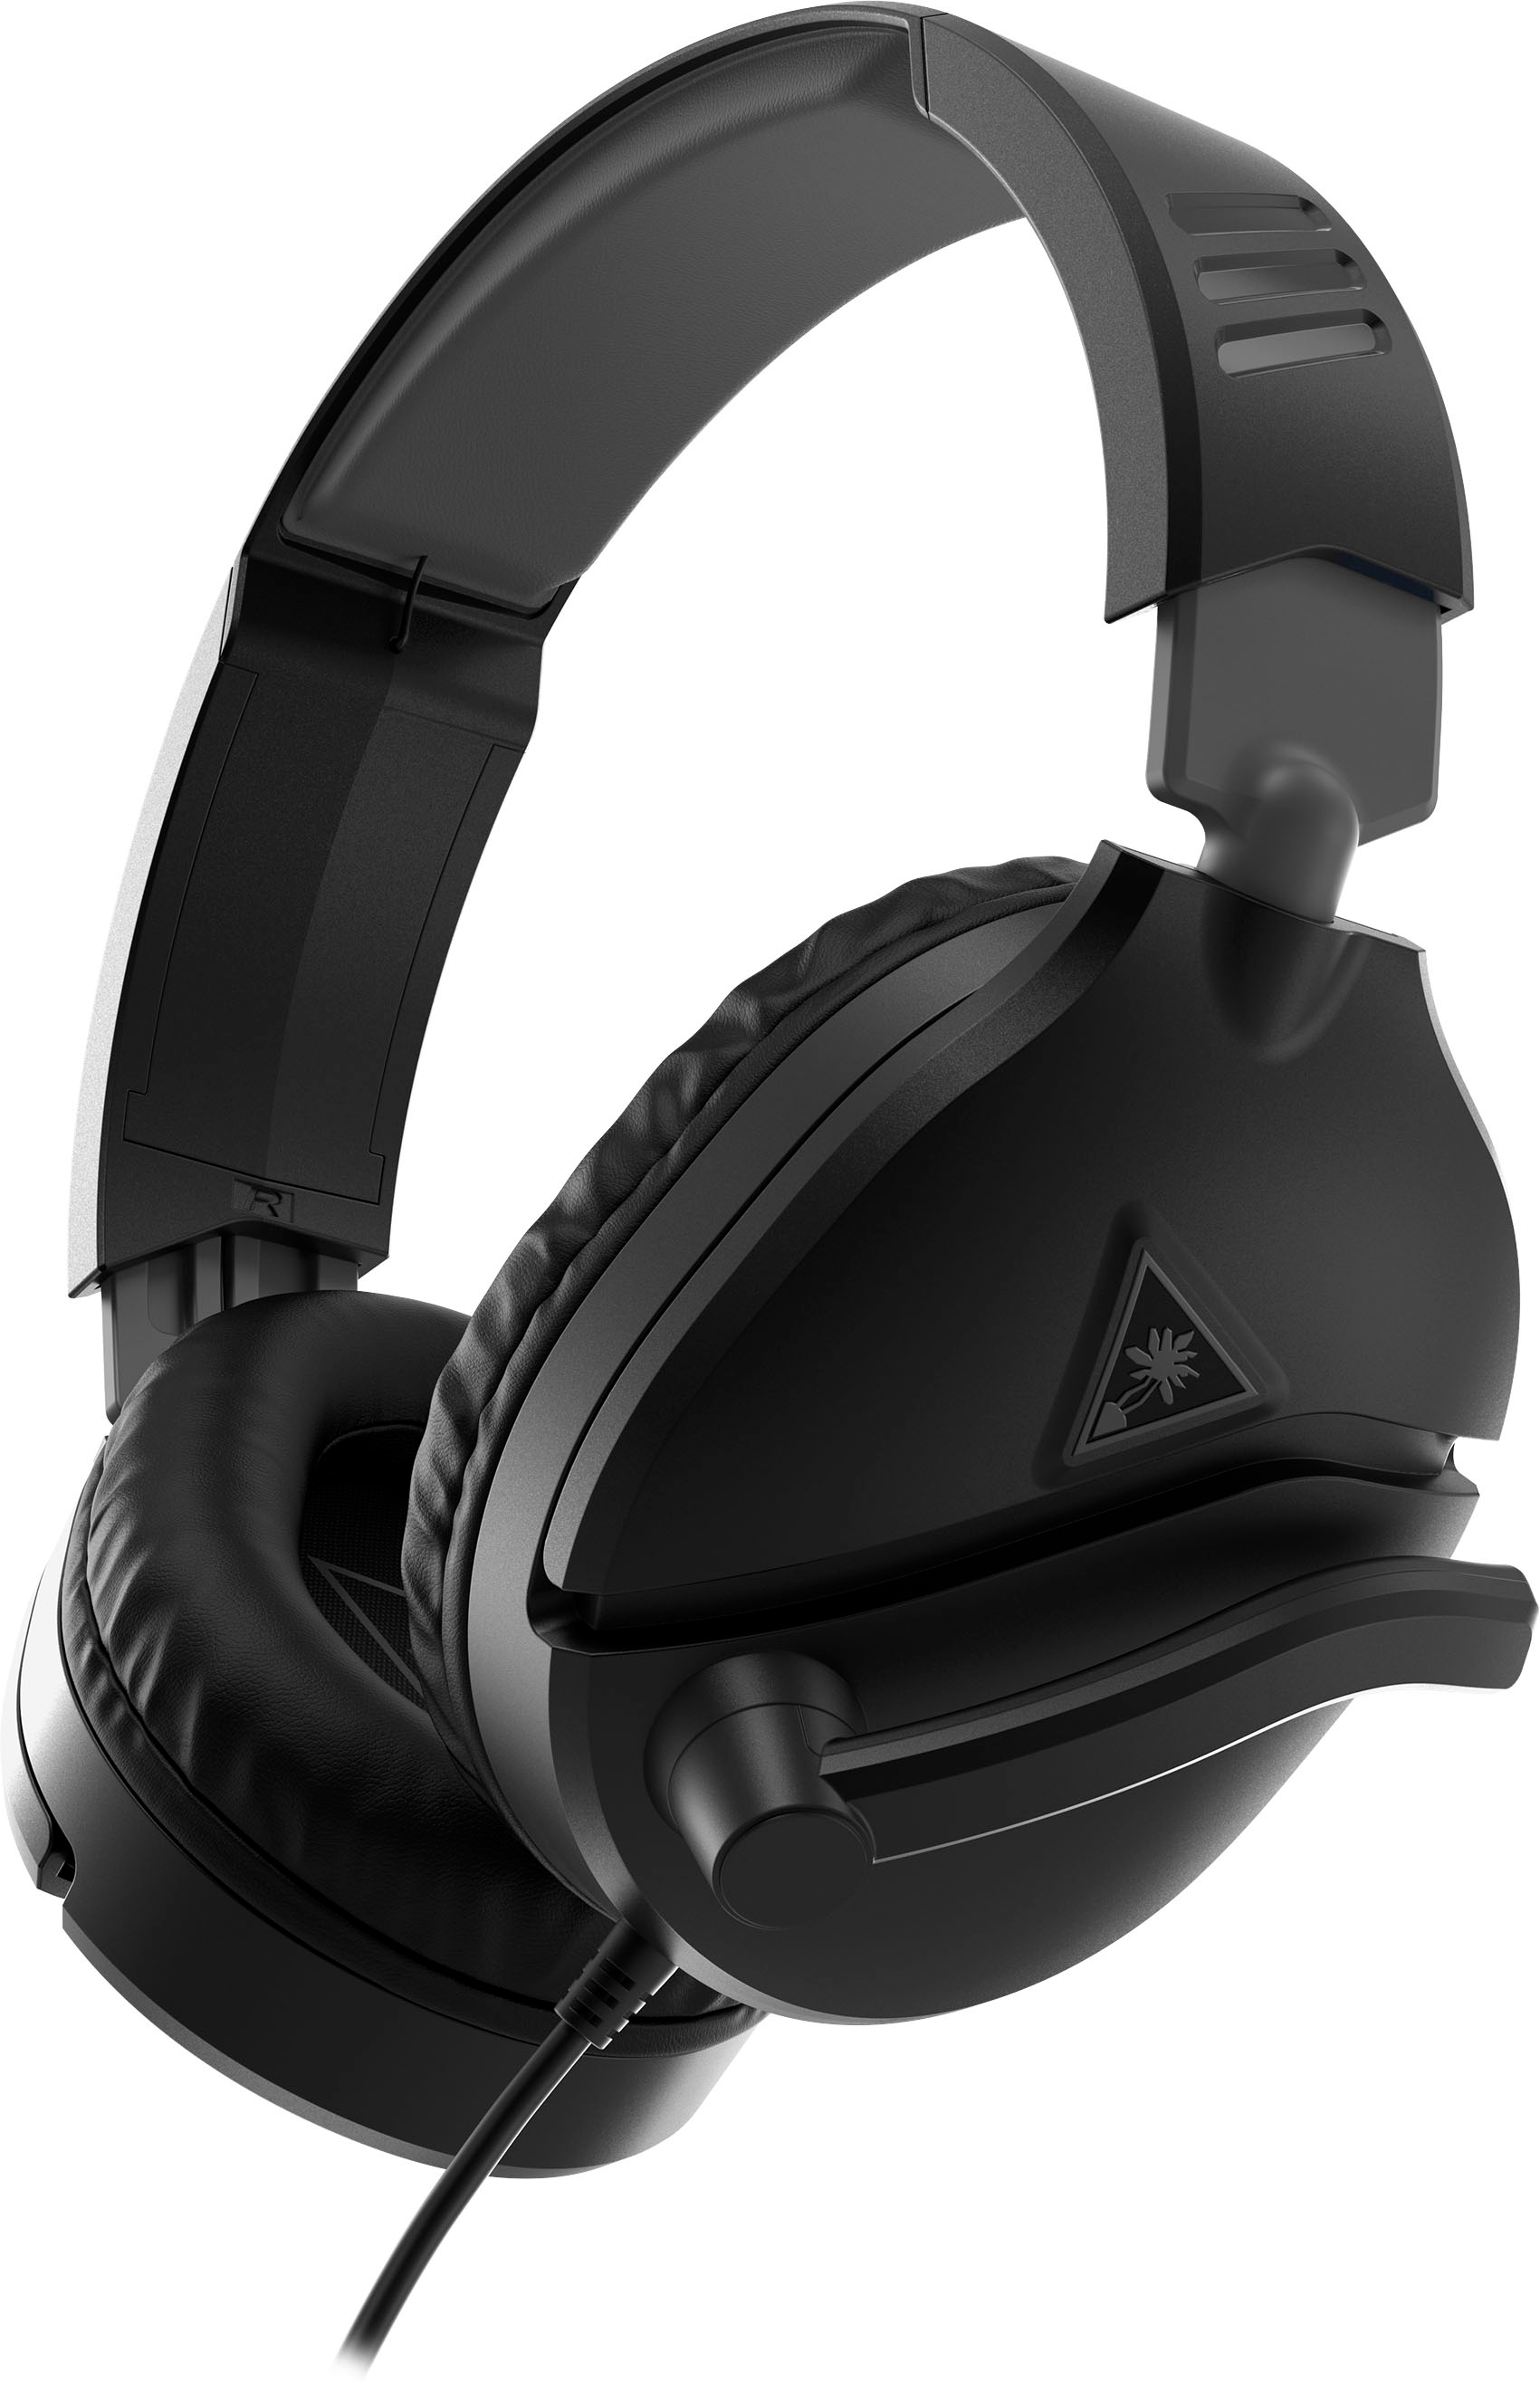 Angle View: Turtle Beach - Recon 70 Gaming Headset for Xbox Series X|S, Xbox One, PS5, PS4, Nintendo Switch, PC & Mobile - 3.5mm Wired Connection - Black